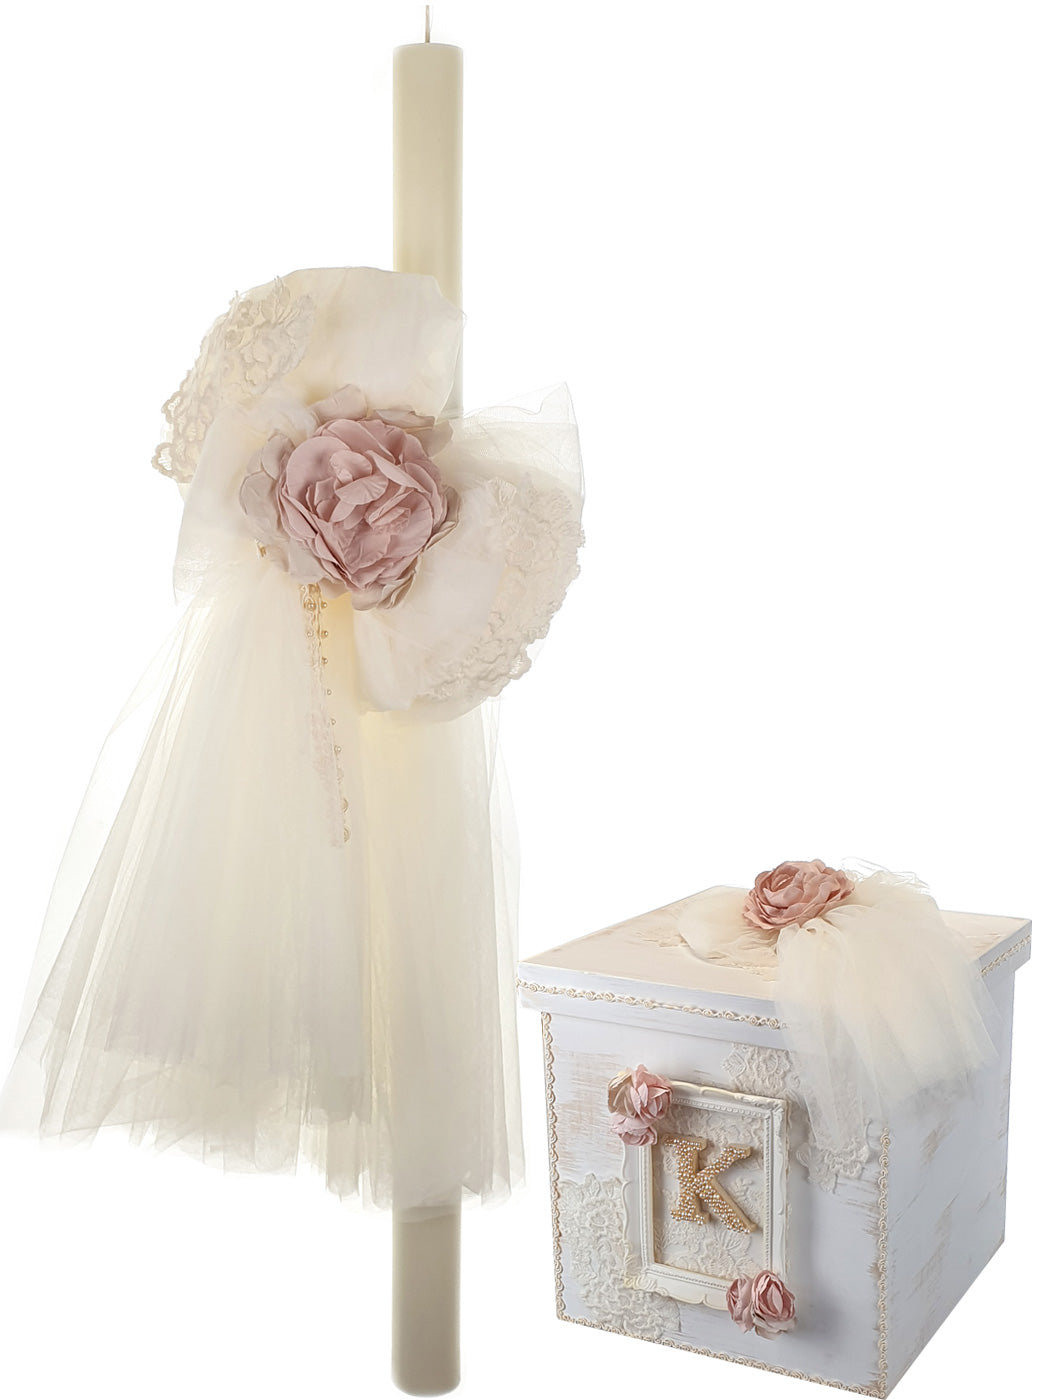 Baptism box with lace and monogram - MAIRA SUMMER